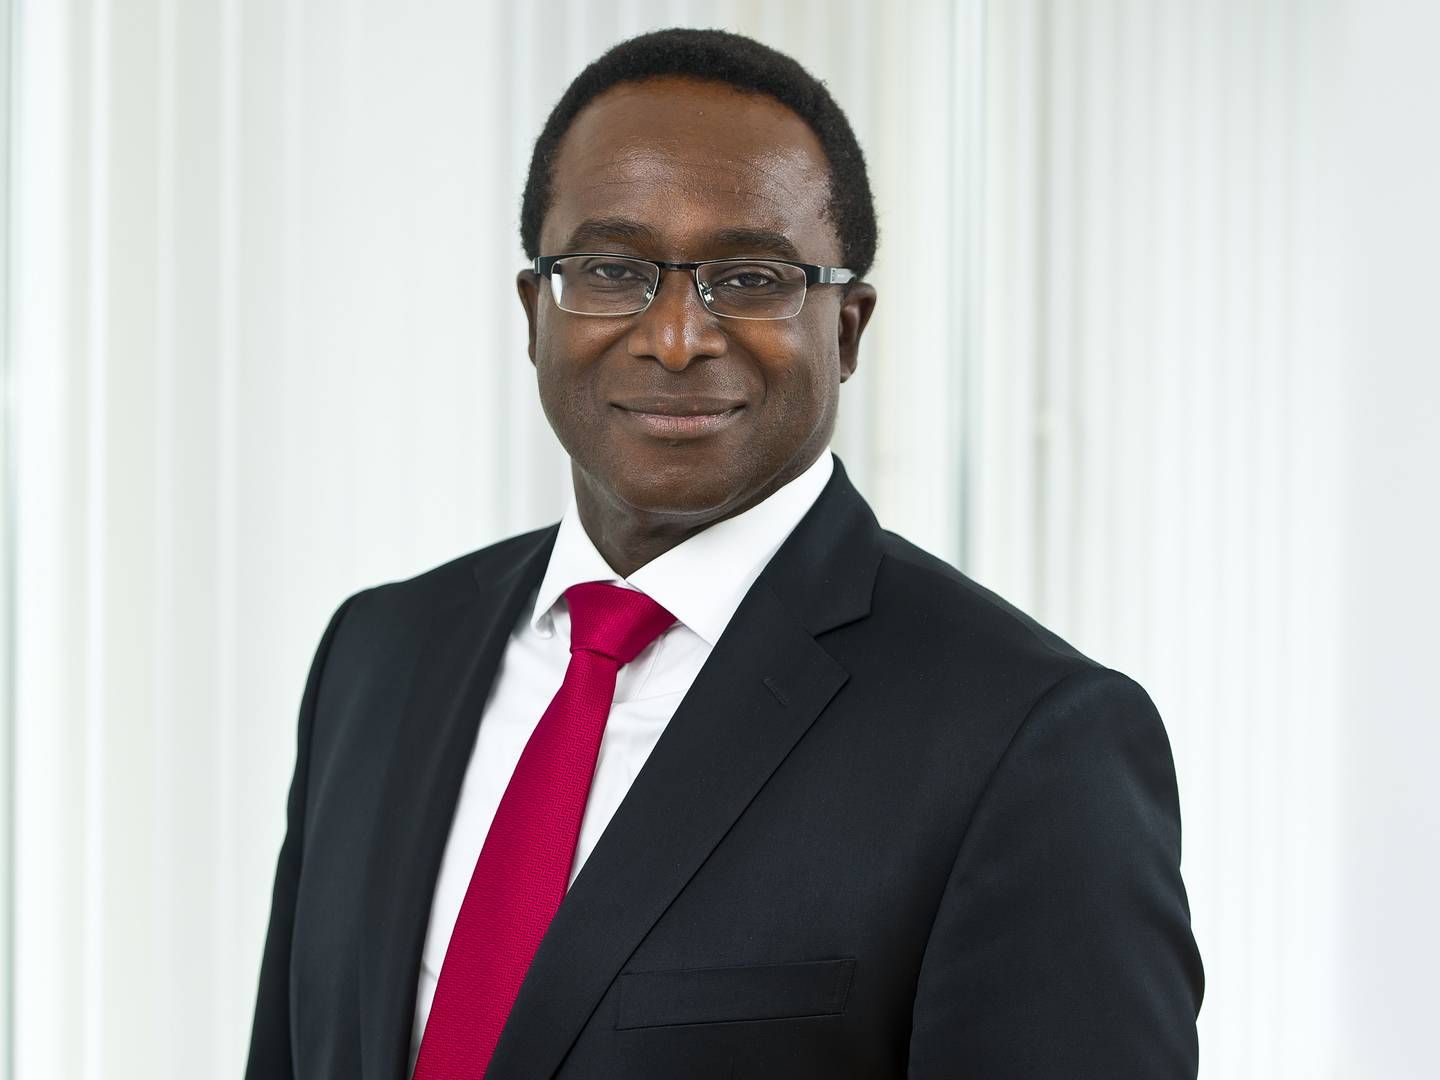 Major oil player Wintershall Noordzee still has grand development plans in the Danish North Sea, but Managing Director Robert Frimpong admits that the market is far from optimal for big investments right now. | Photo: Wintershall Nordzee